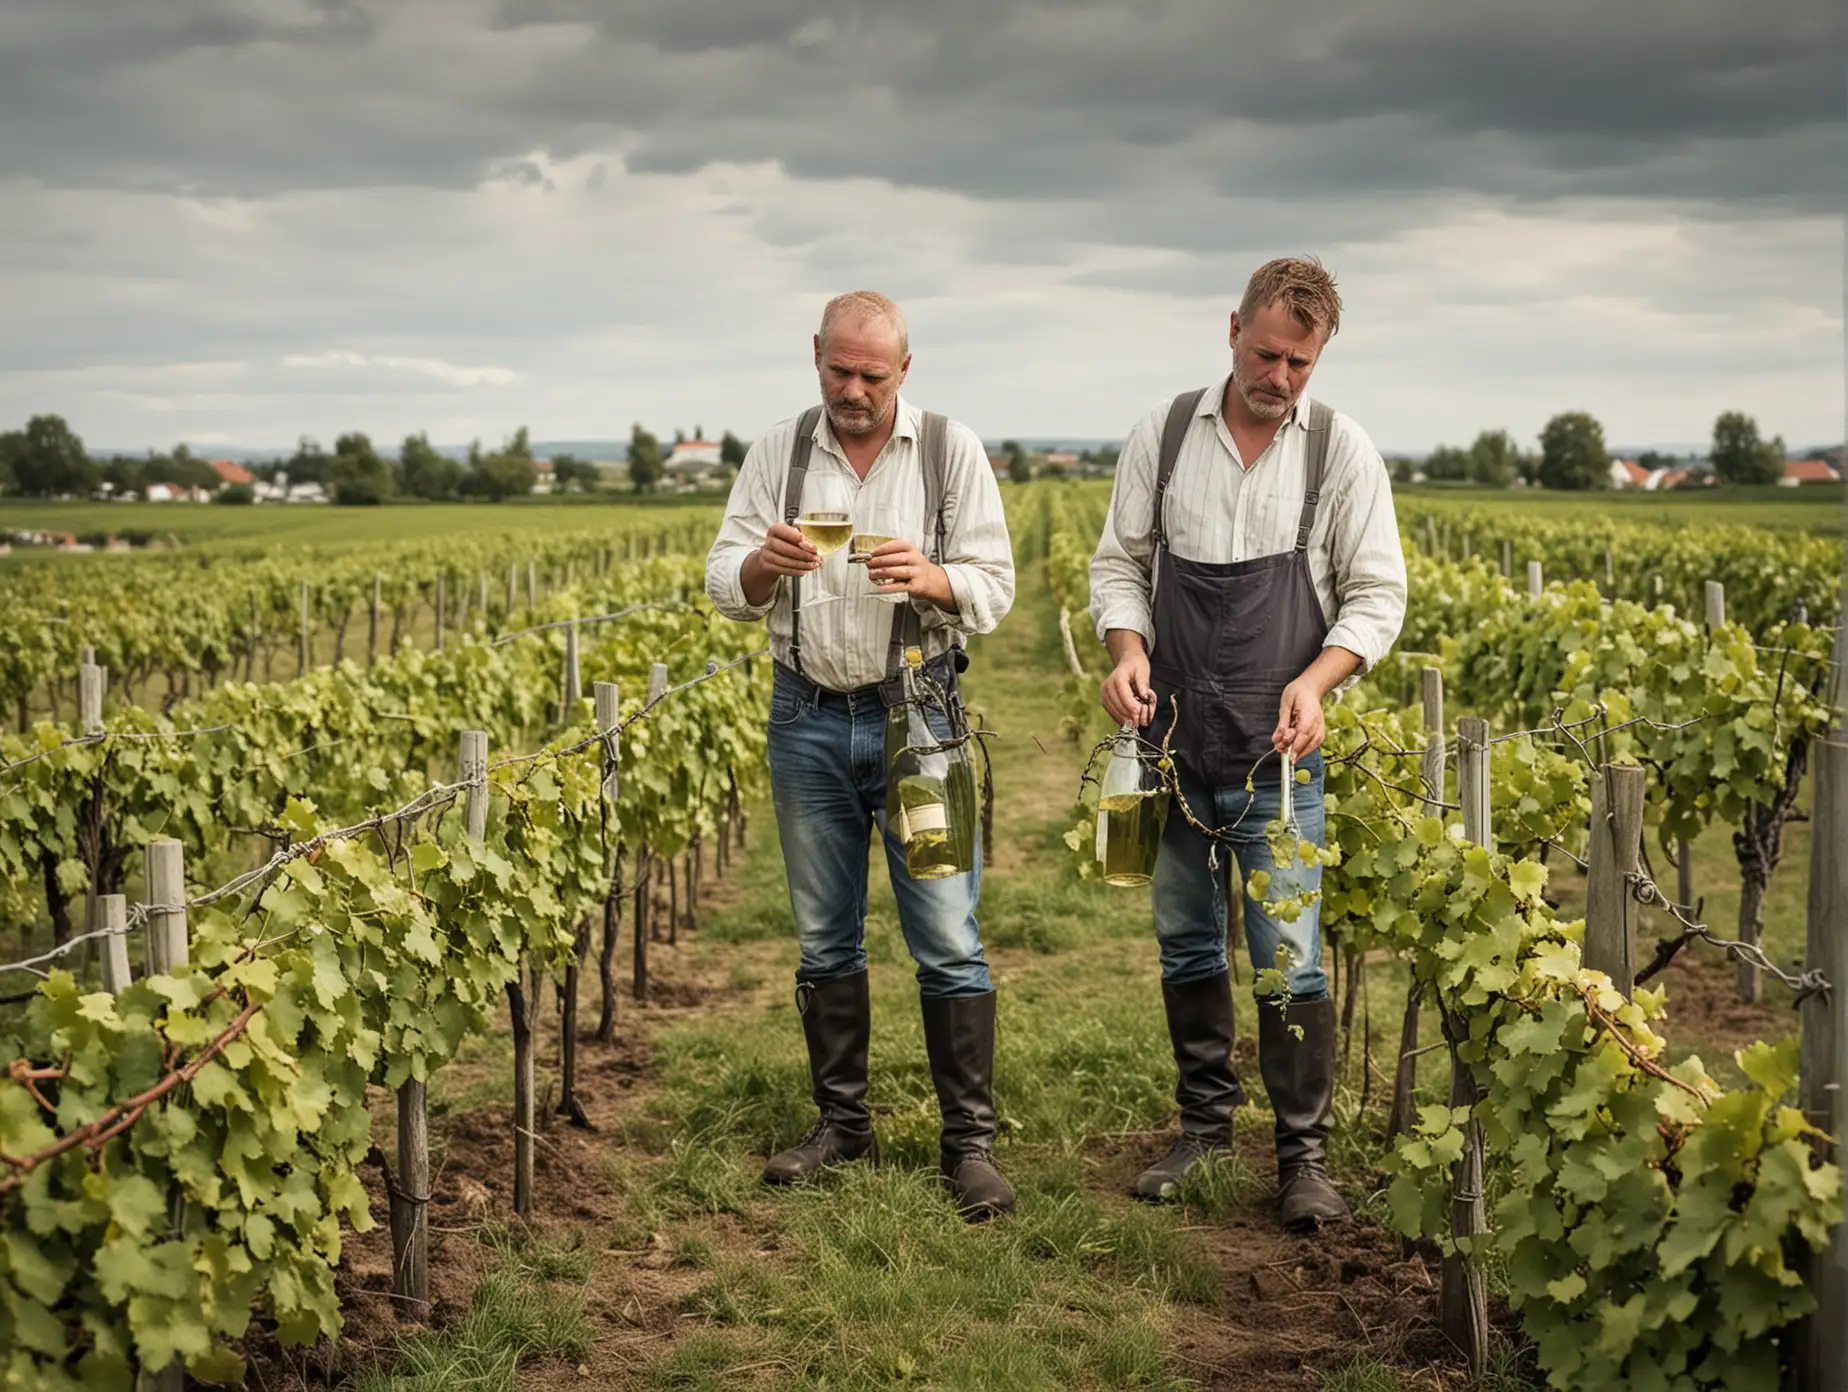 Danish farmer standing in a field of grape vines. He is pouring himself a glass of white wine. He is very unhappy.